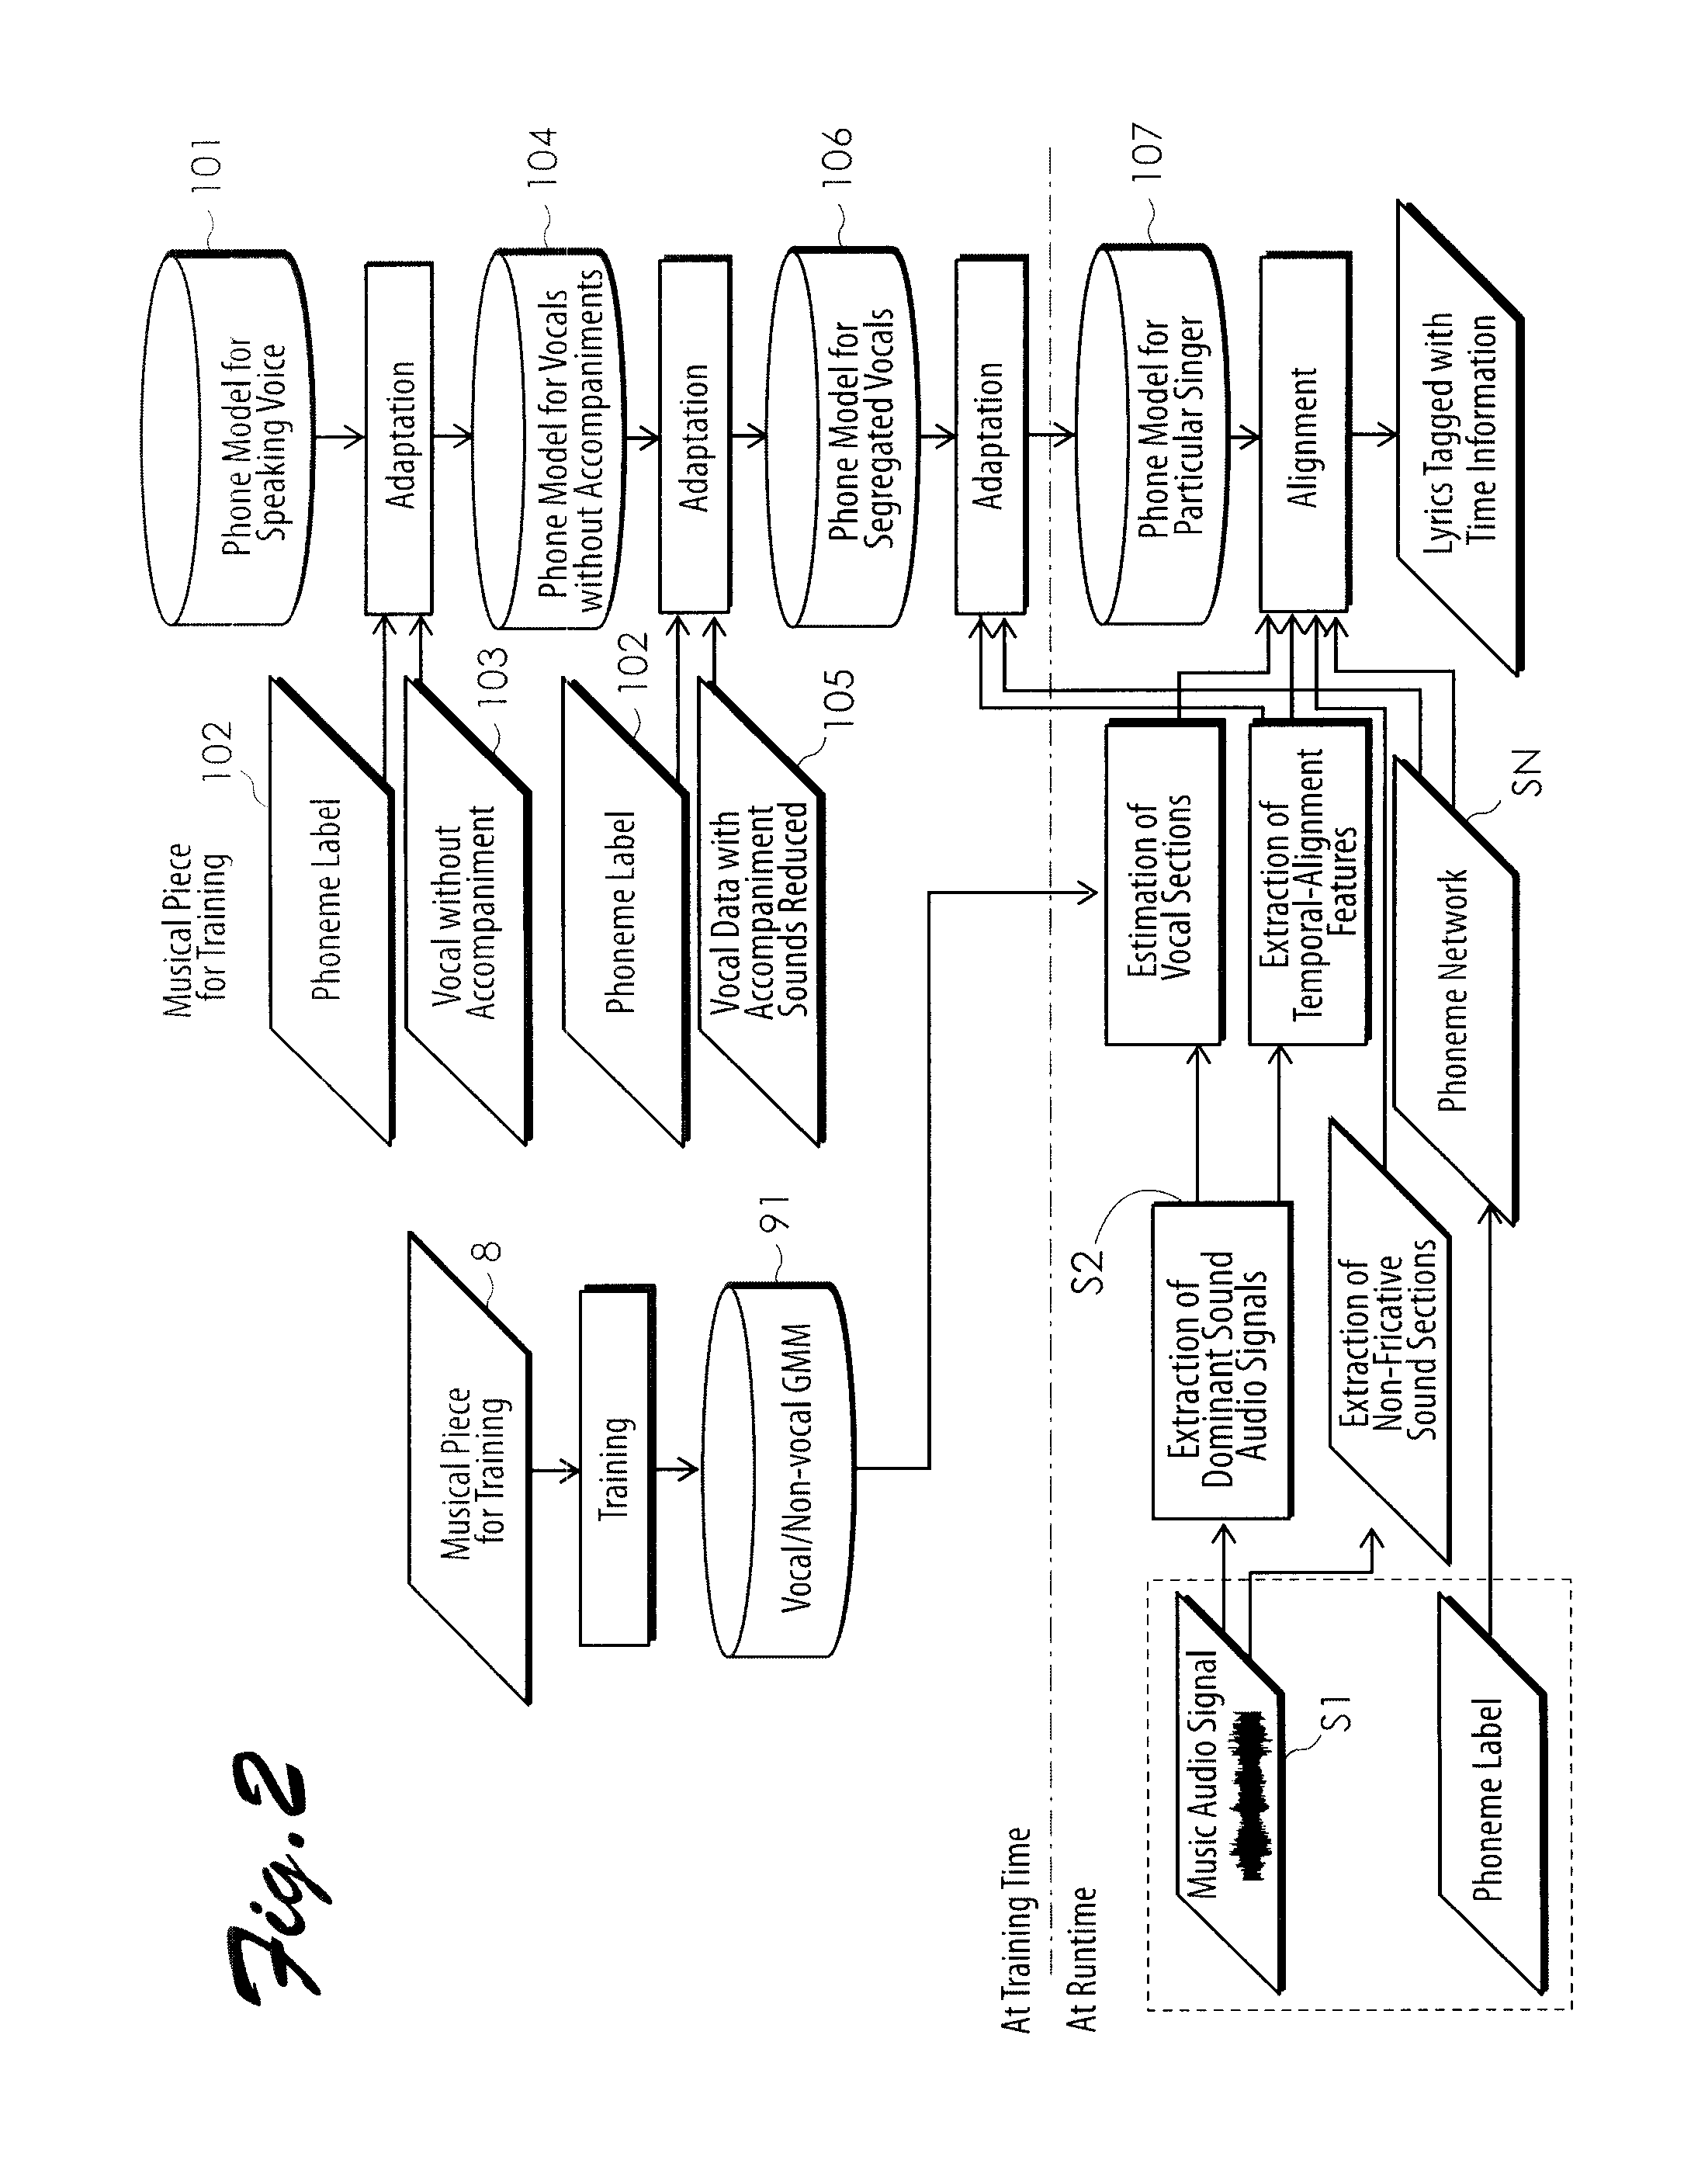 System and method for automatic temporal adjustment between music audio signal and lyrics